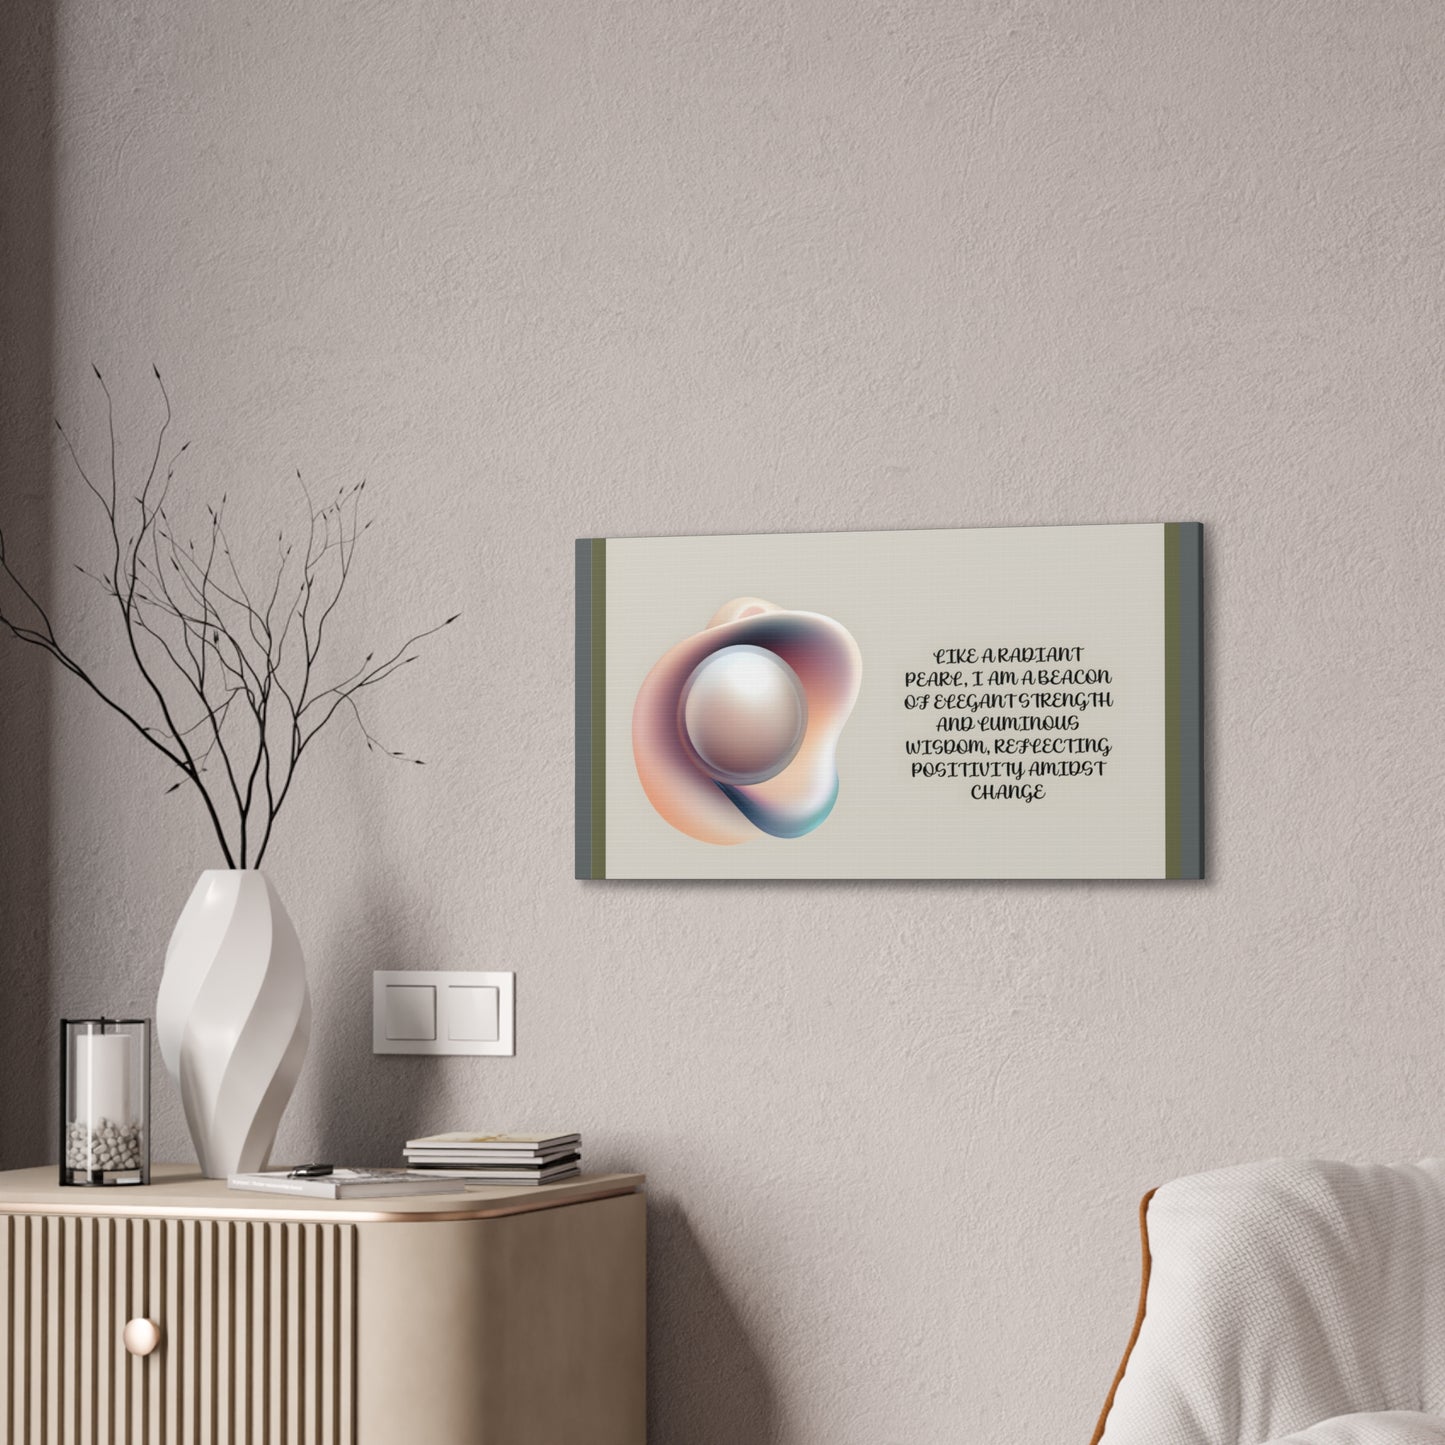 Pearl Essence: Radiant Beacon of Strength Wall Art"